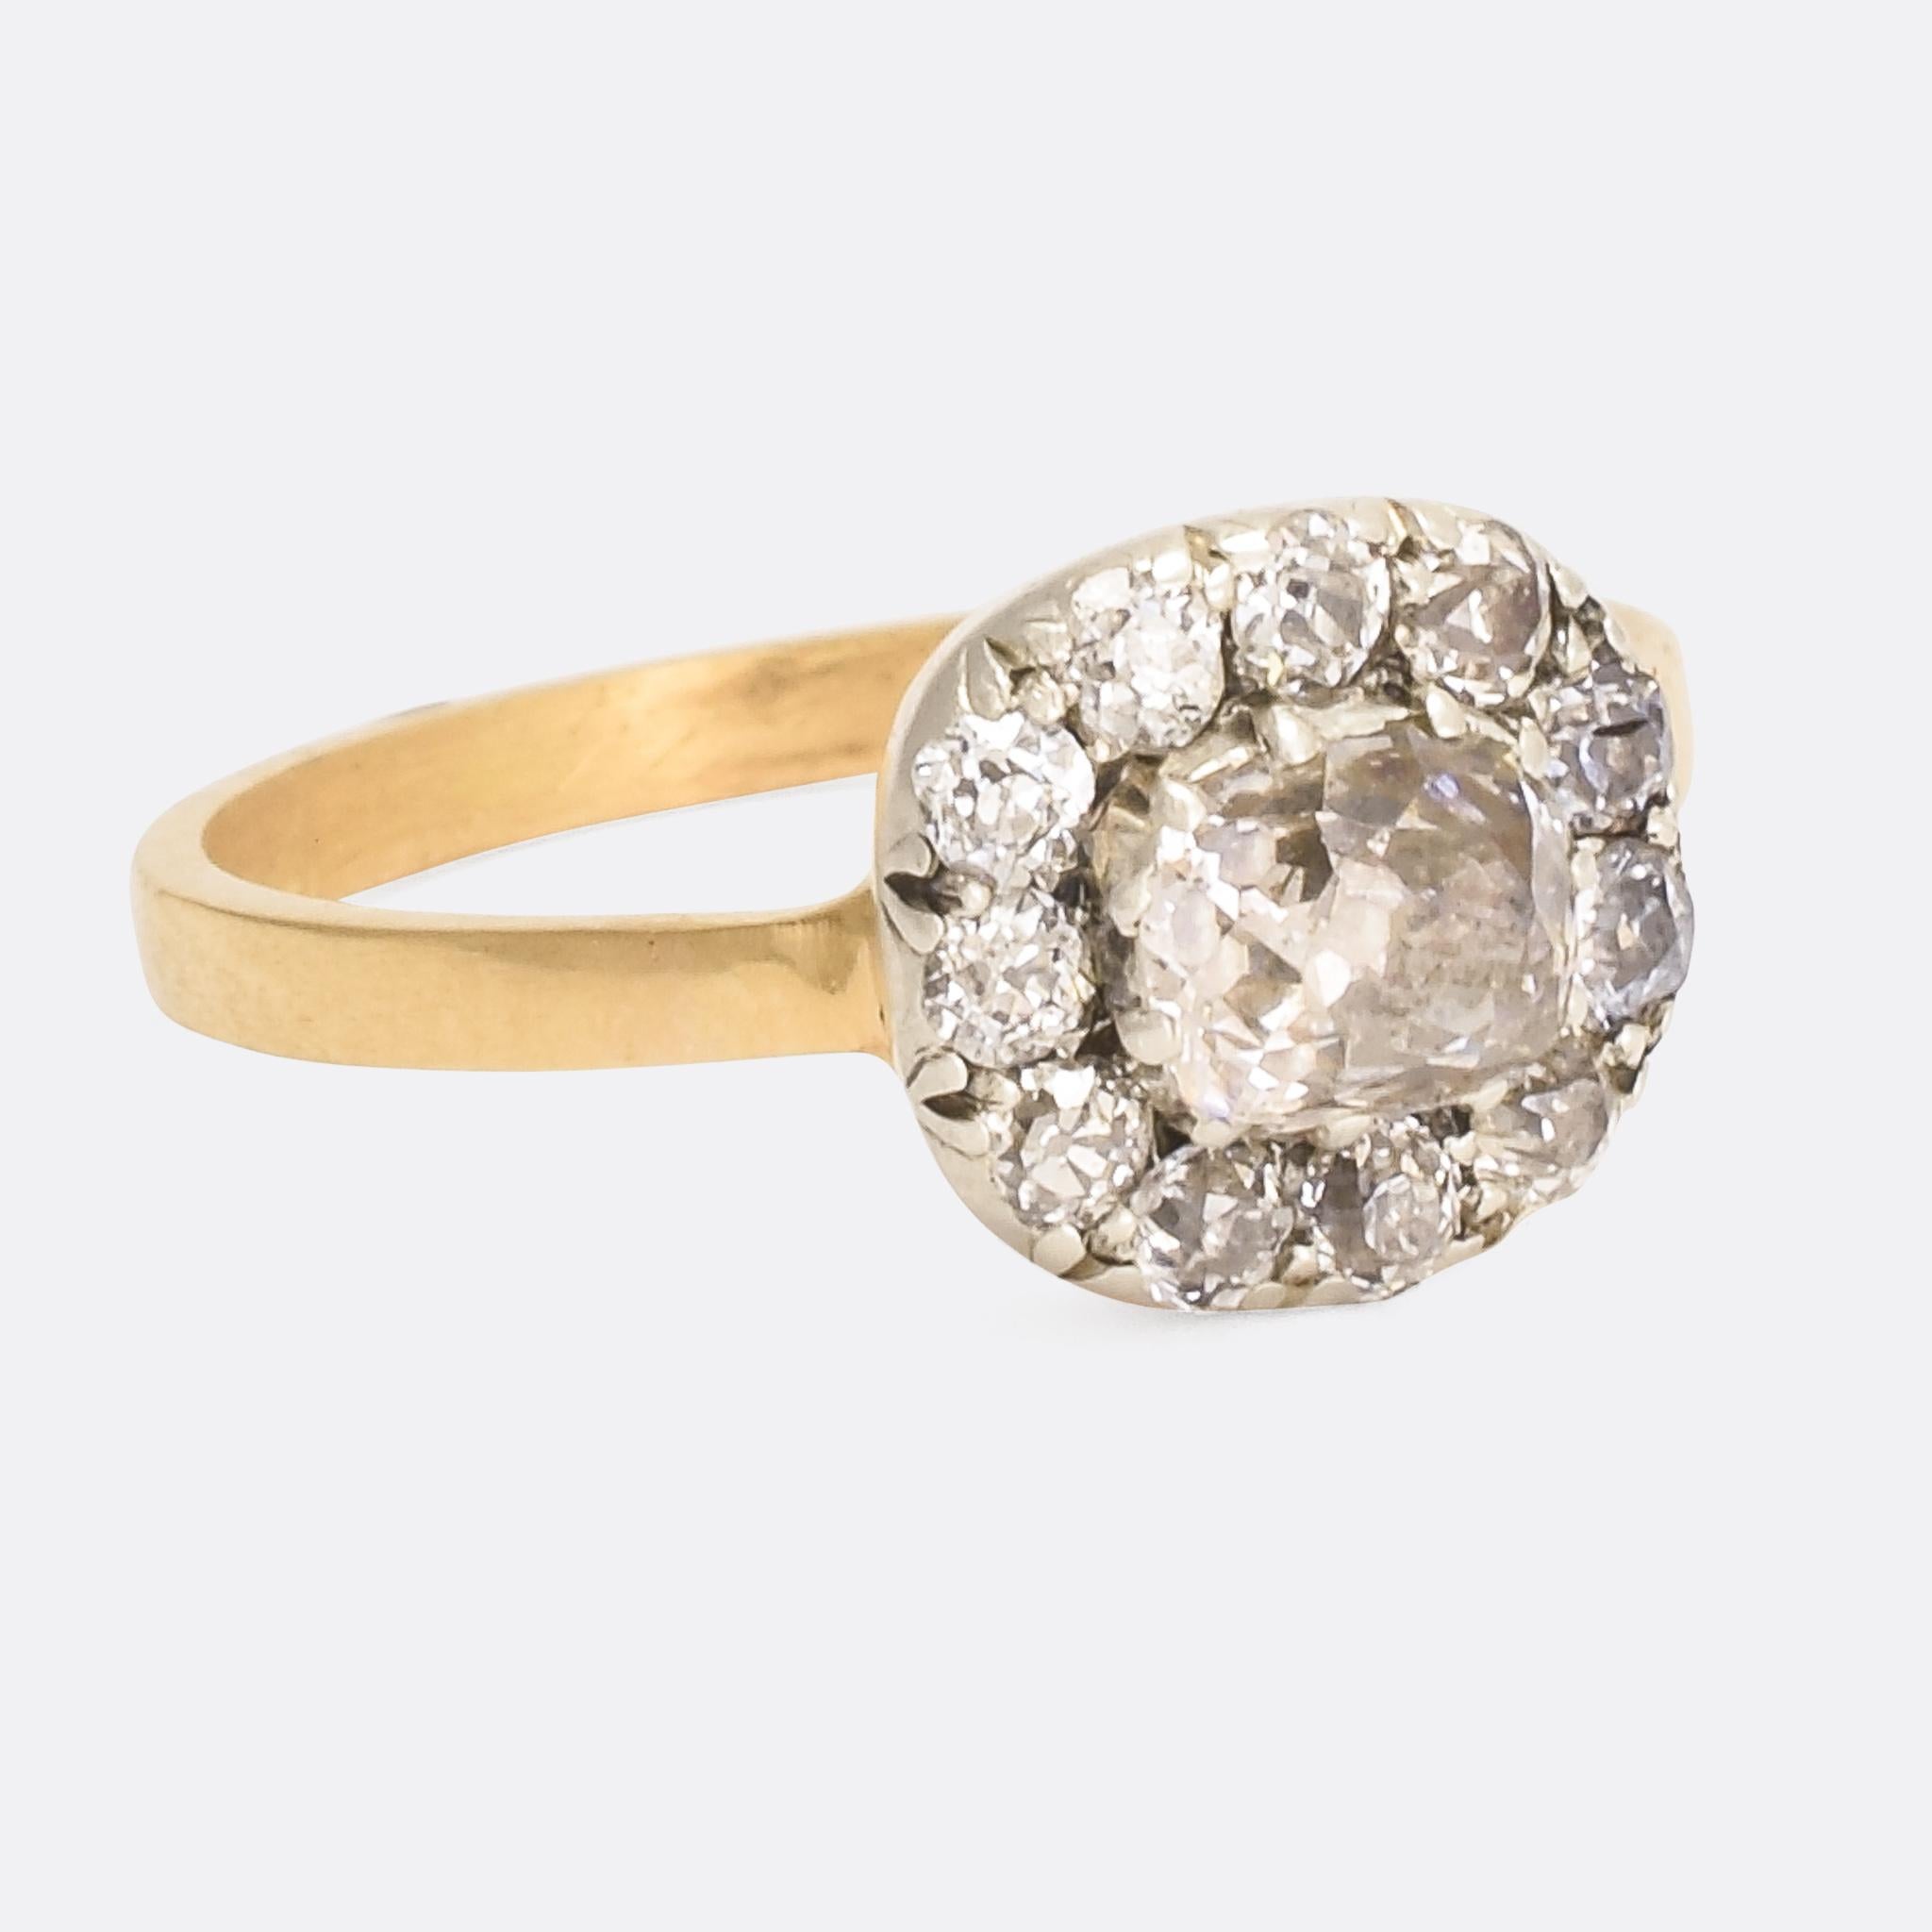 A stunning .67ct cushion cut diamond forms the centrepiece of this antique cluster ring. The head is cushion shaped, matching the central stone, and set with a further 11 old mine cut stones. We've opened up the back making it ideal for every day